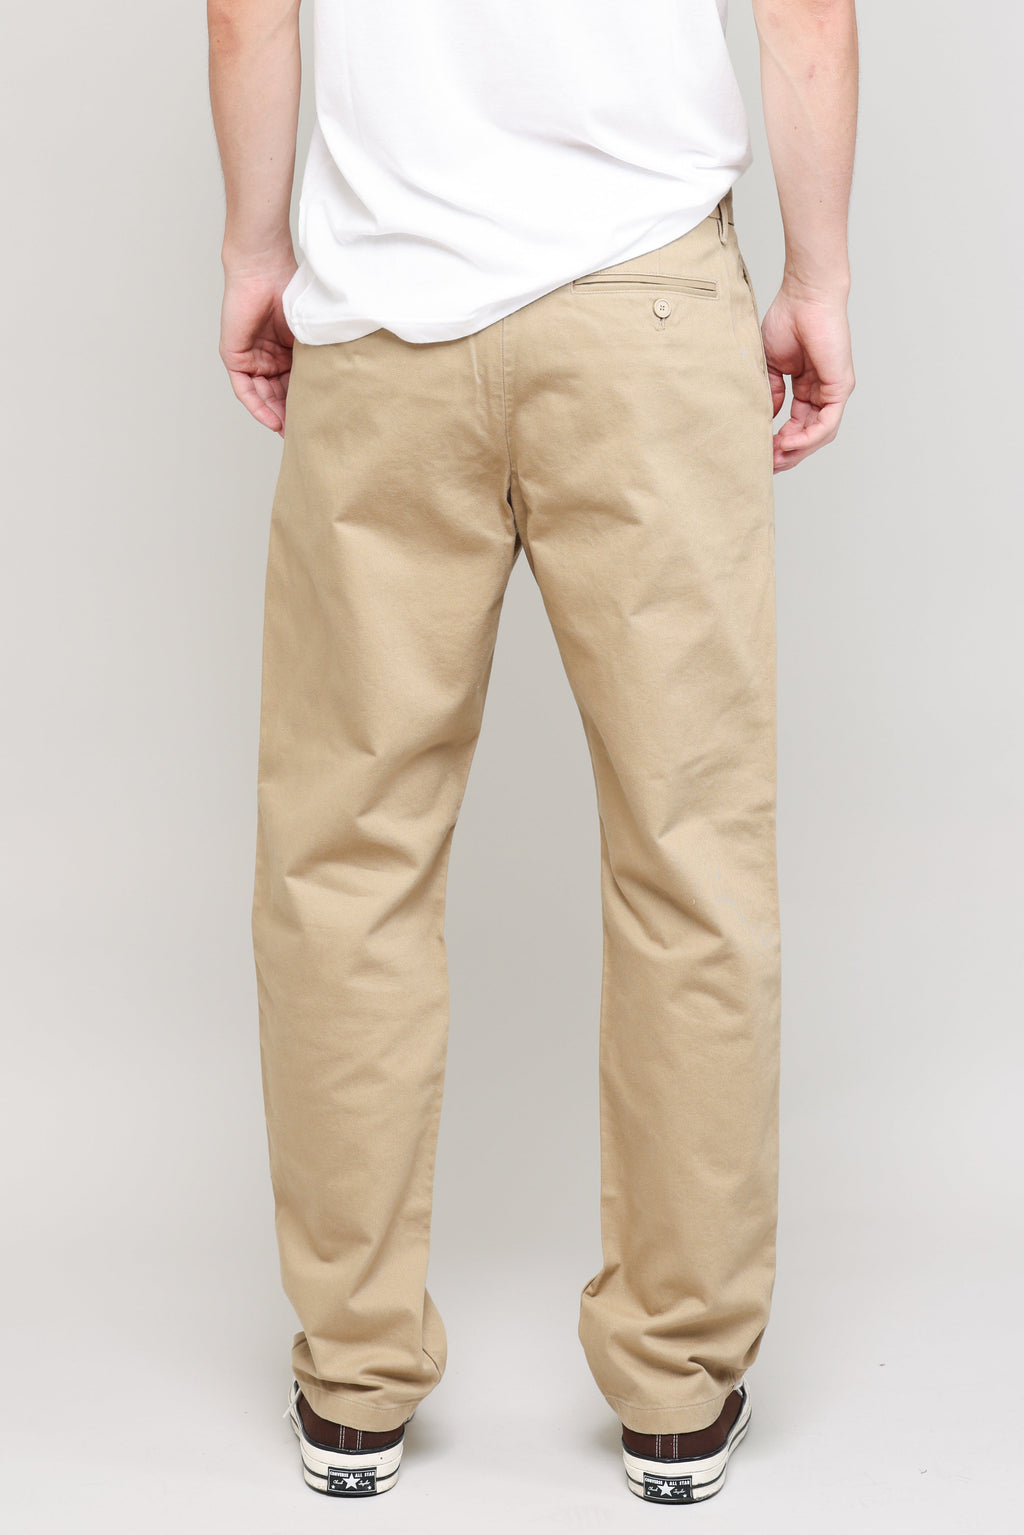 Pleated Chino Vintage French Drill in Khaki 05